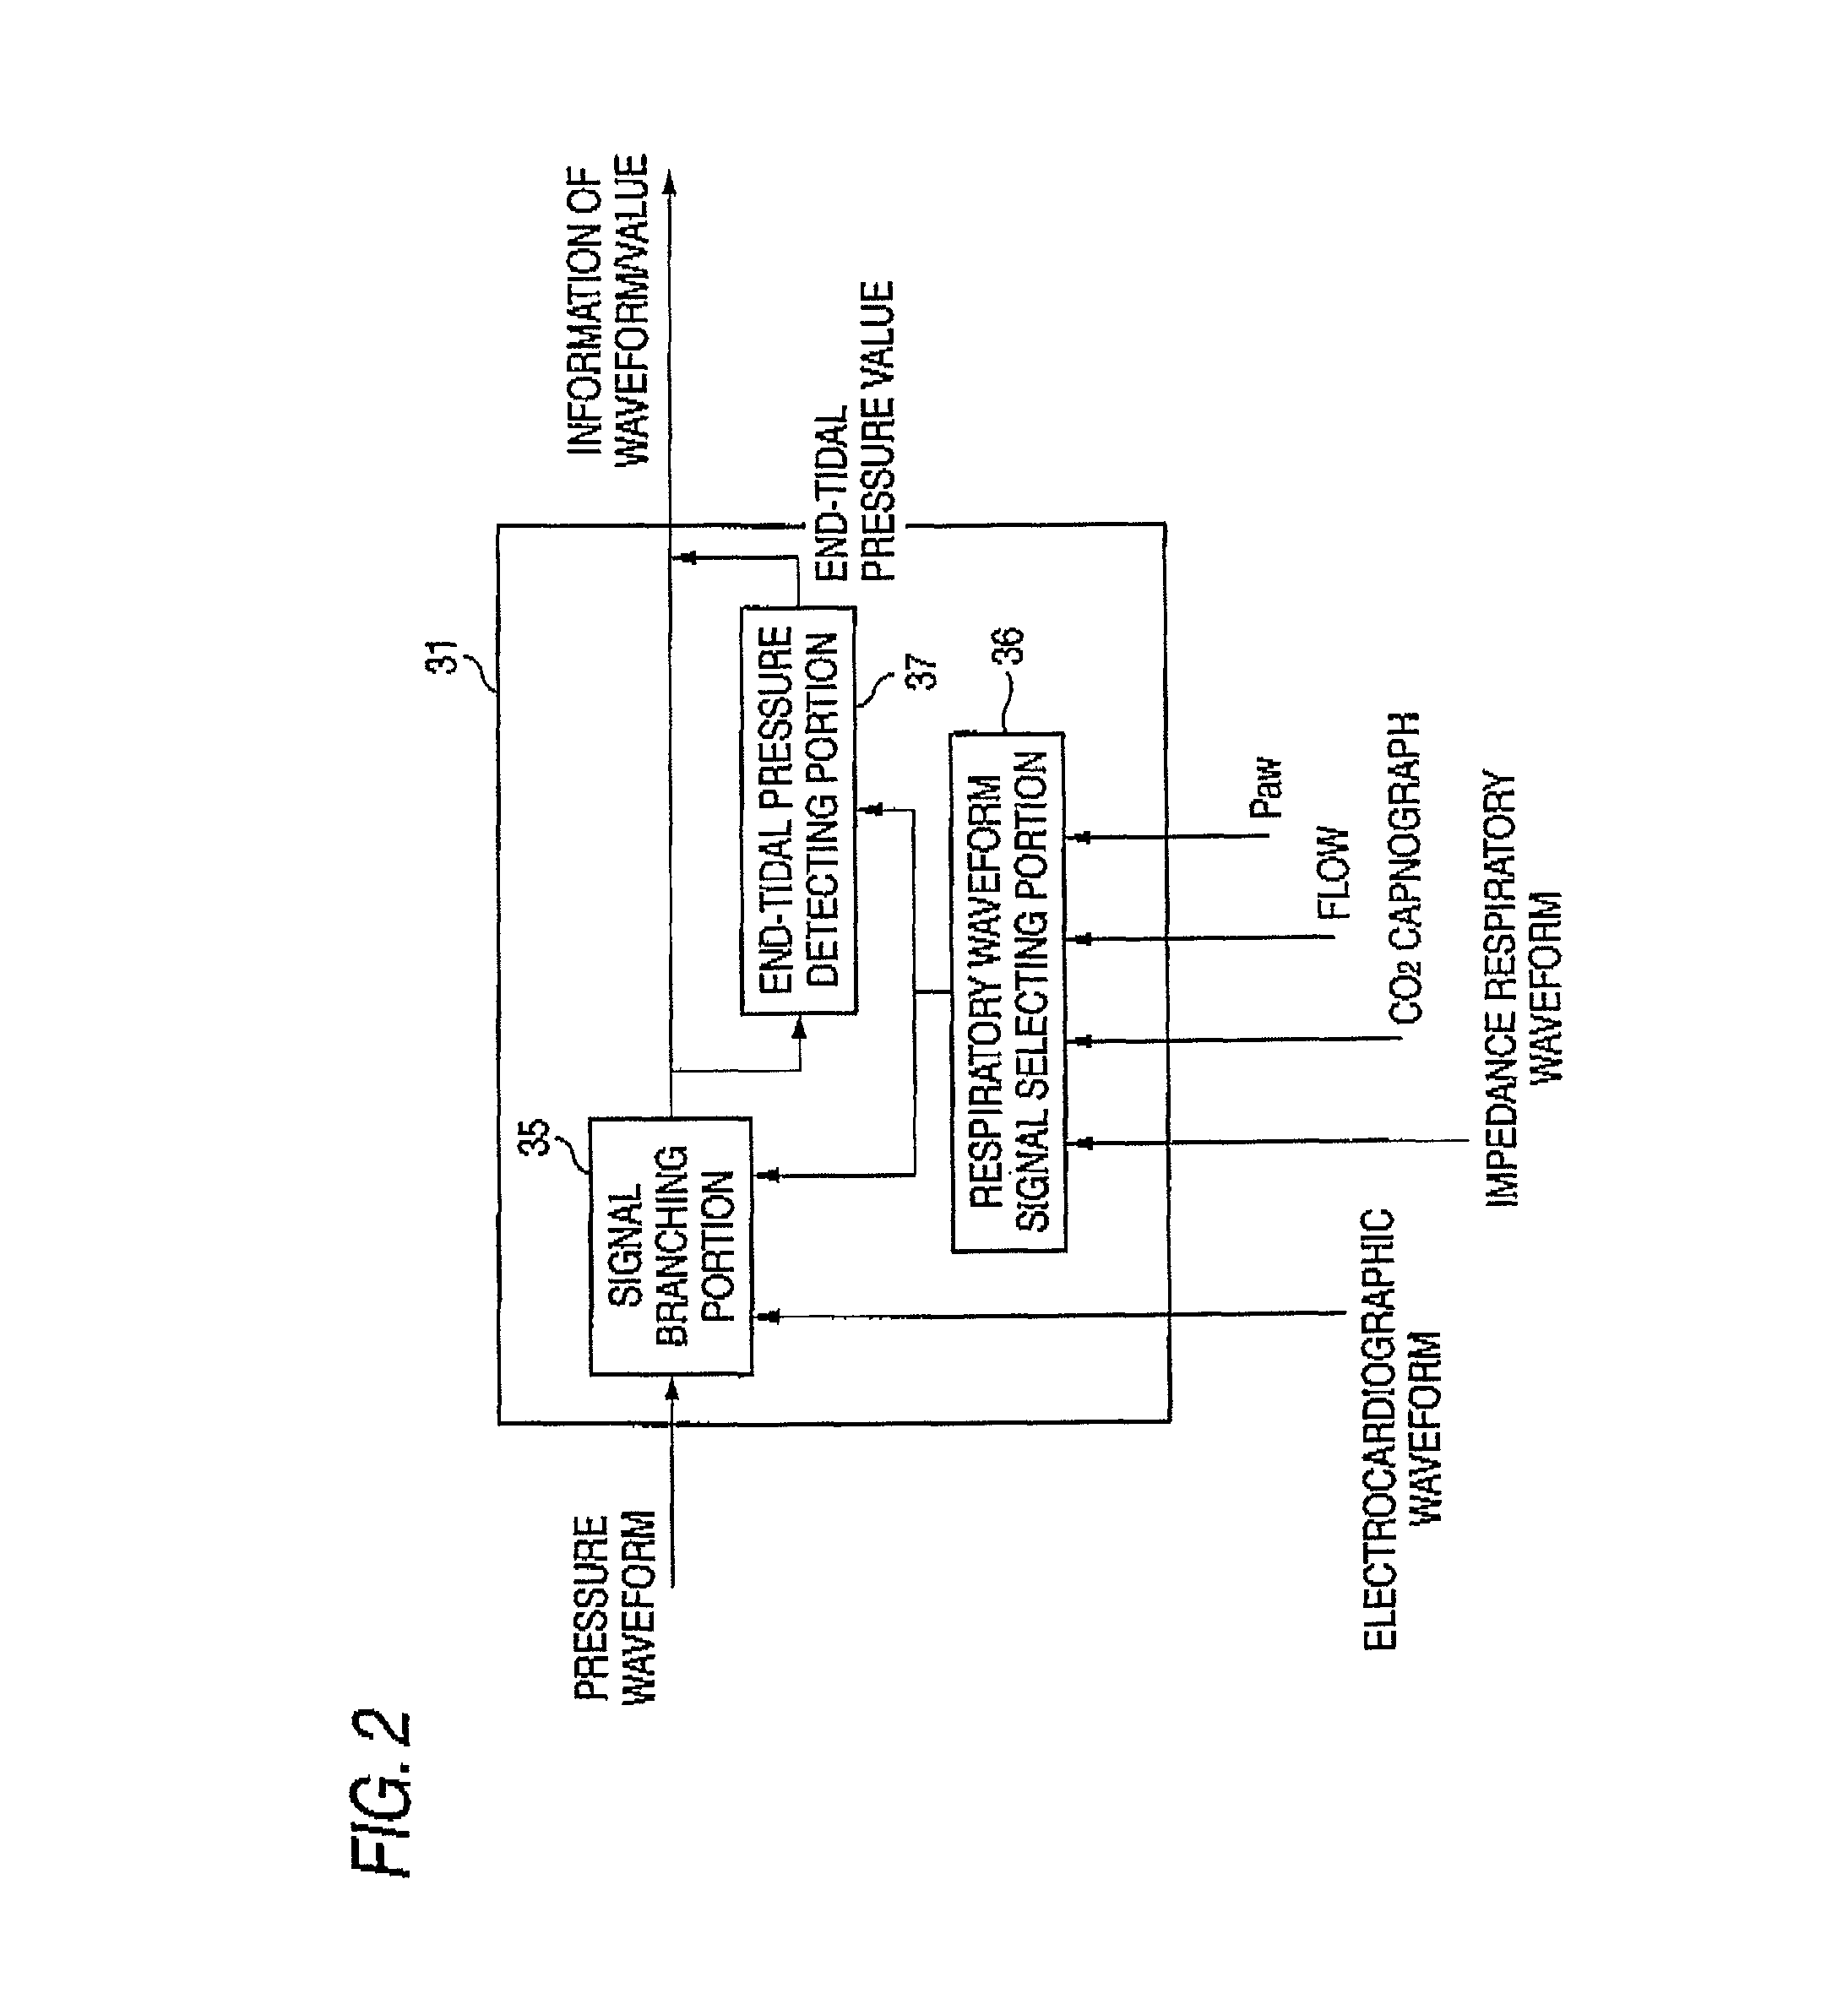 Apparatus for biological signal measurement at point of end-tidal